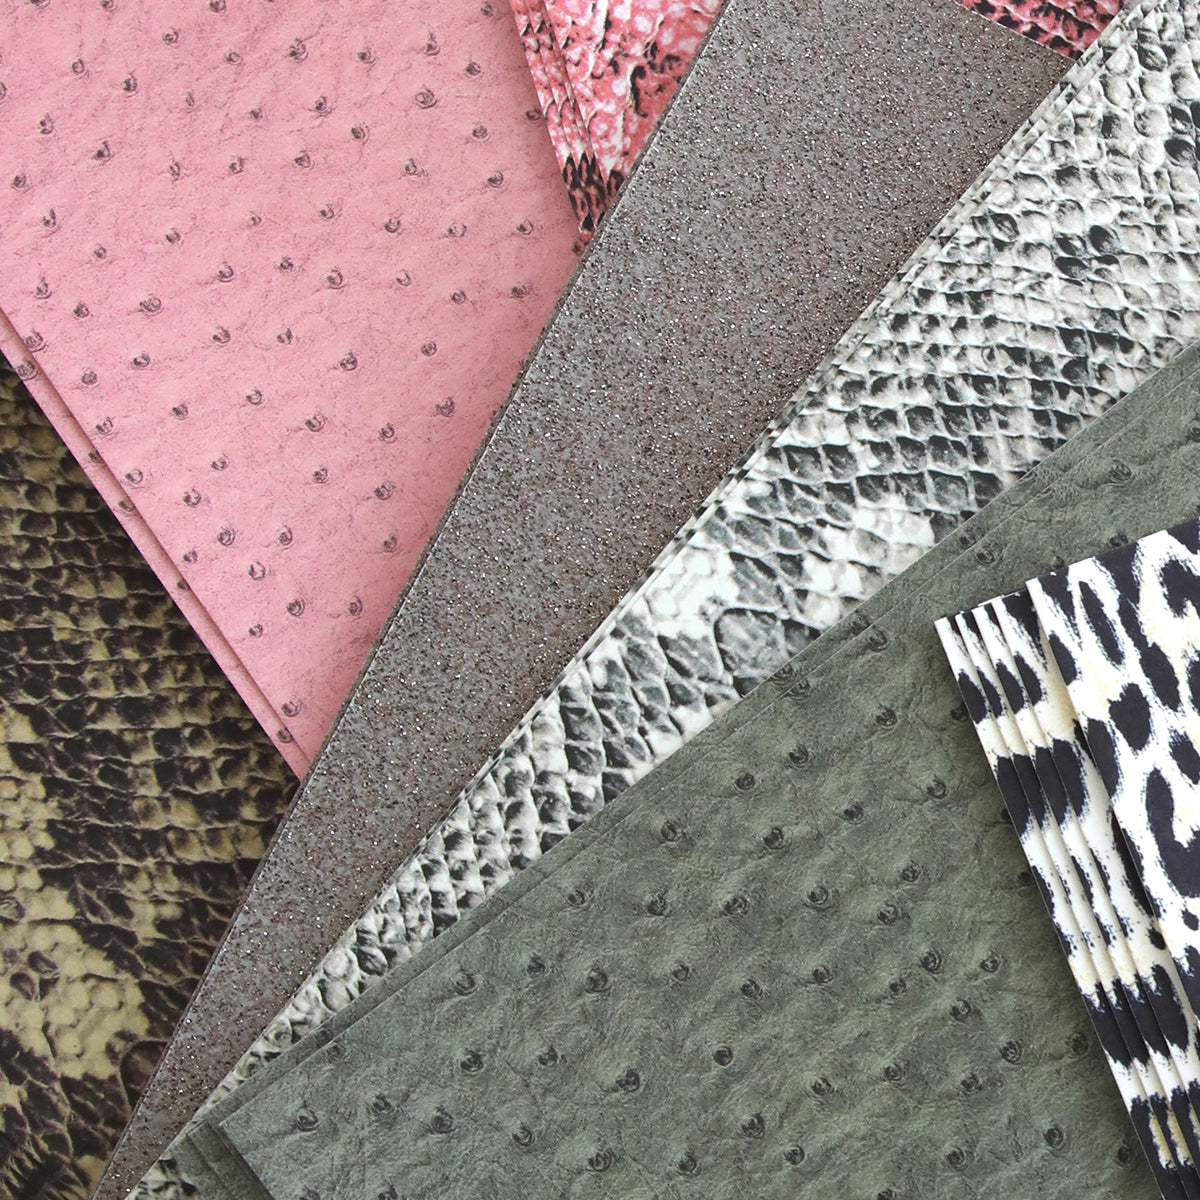 An assortment of textured fabric and Animal Print 12x12 Cardstock samples in various patterns and colors.